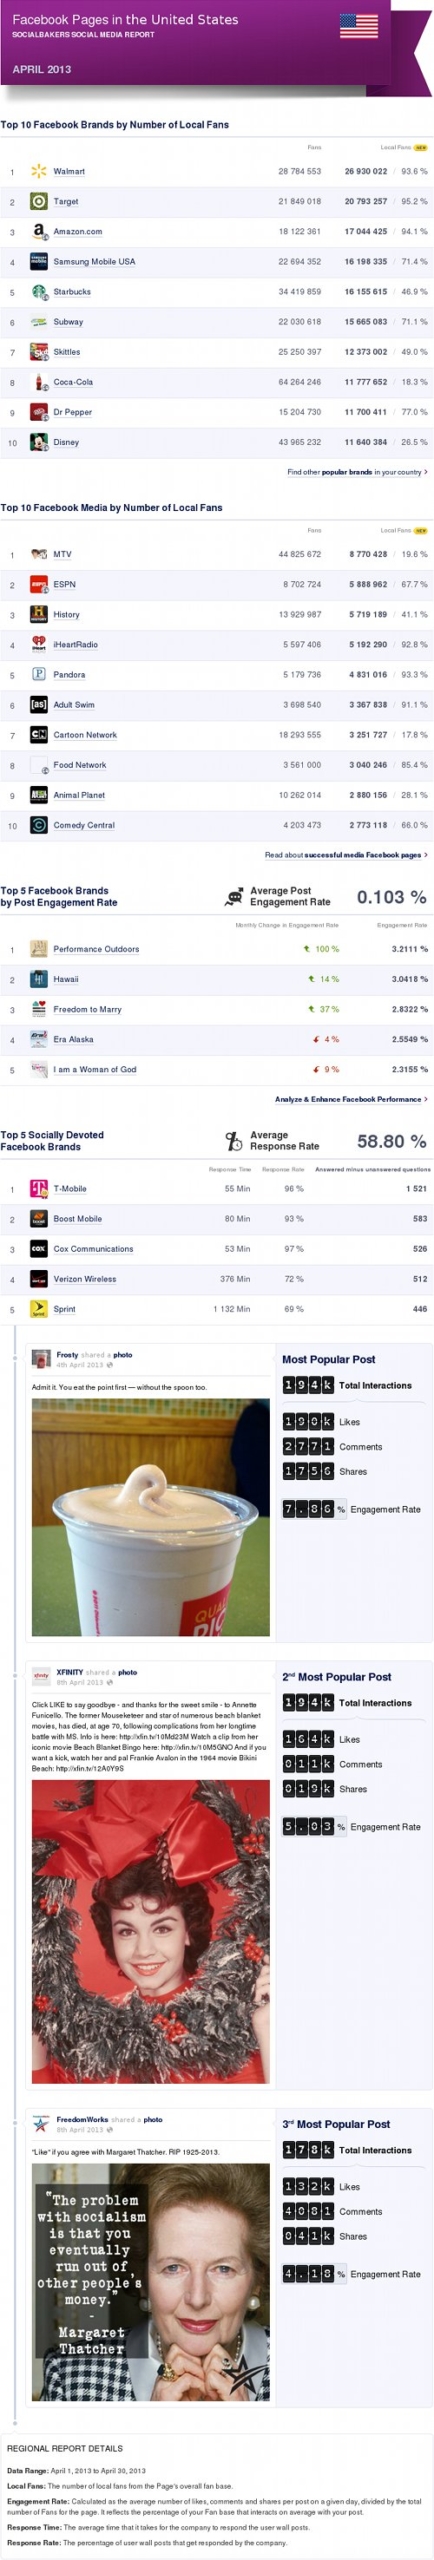 Top Facebook Pages in the US, April ’13